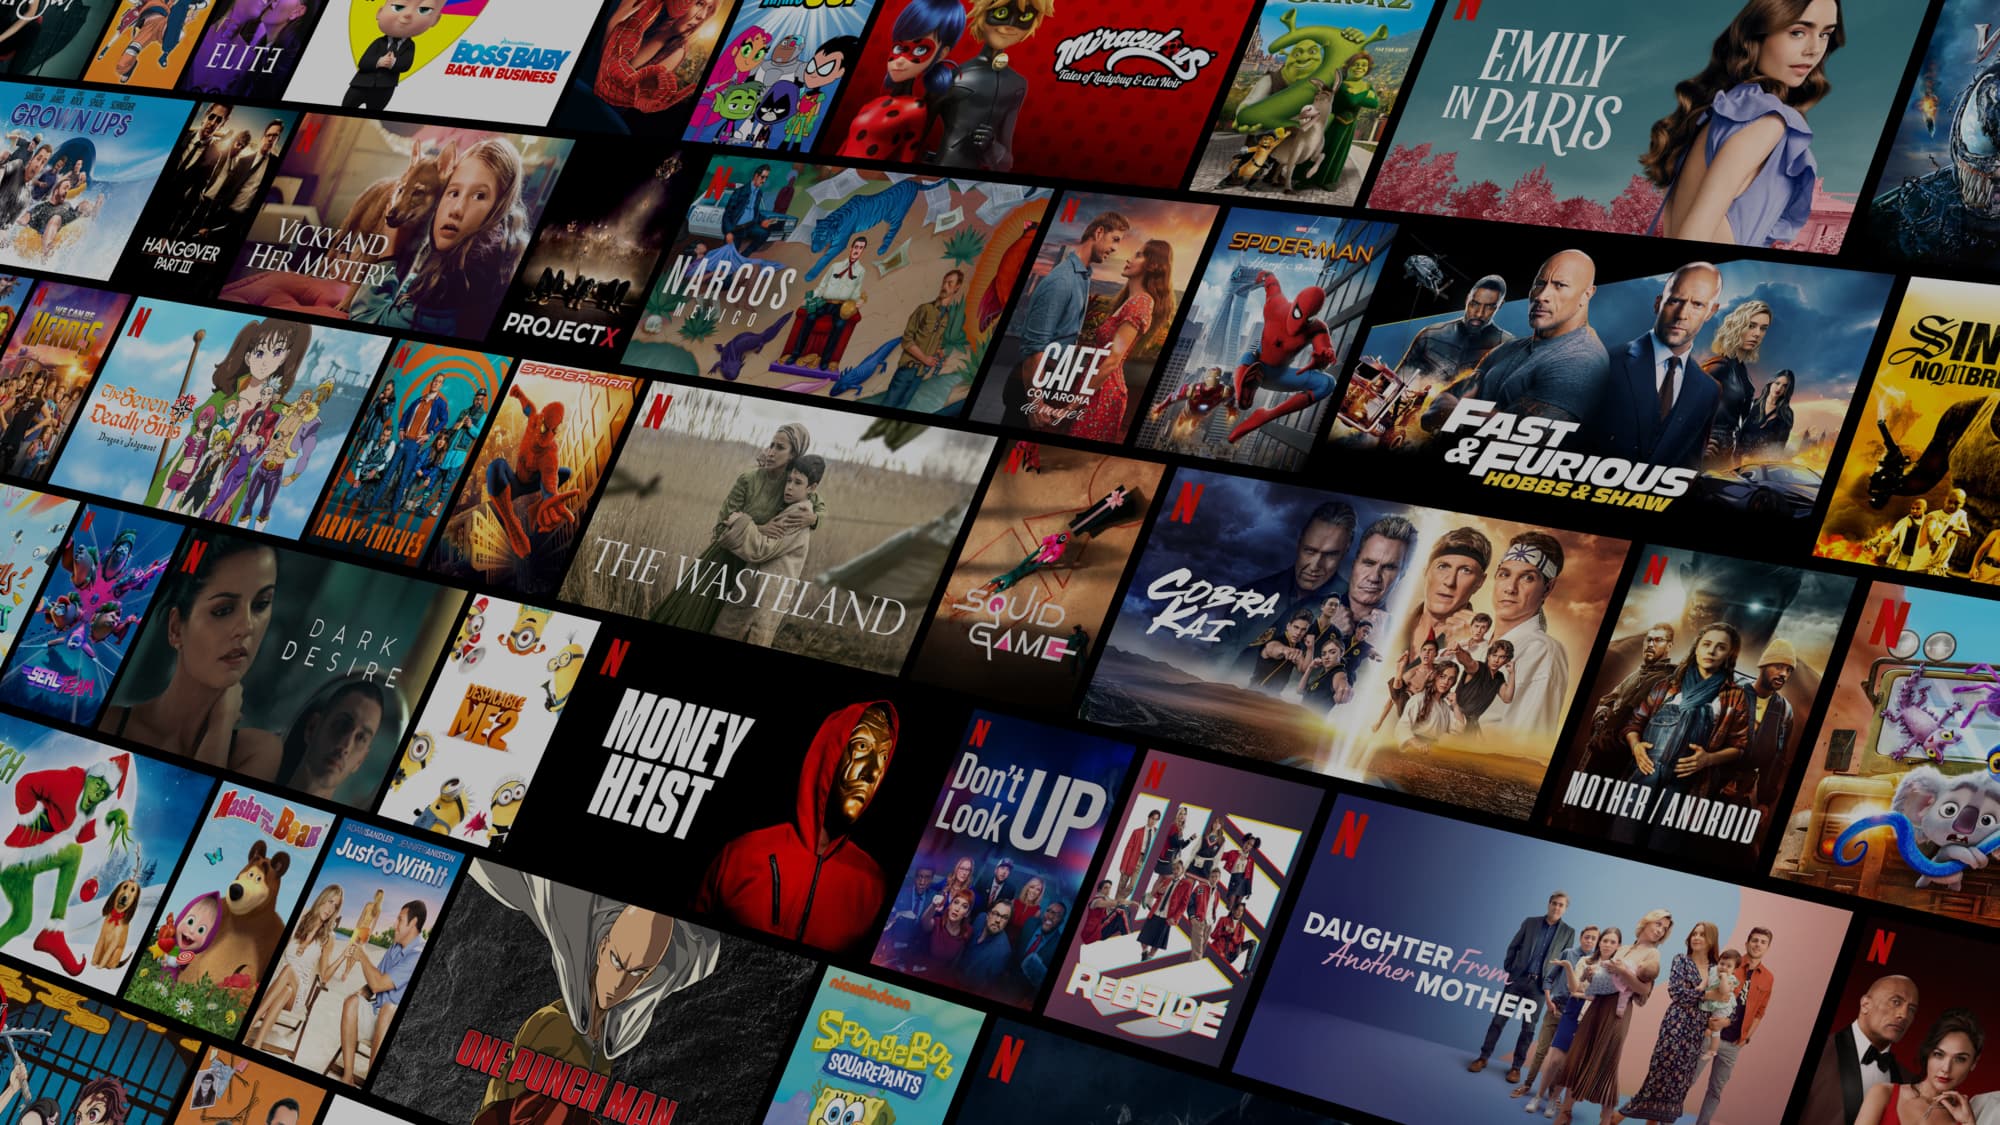 How to Change Your Netflix Password - Practically Networked